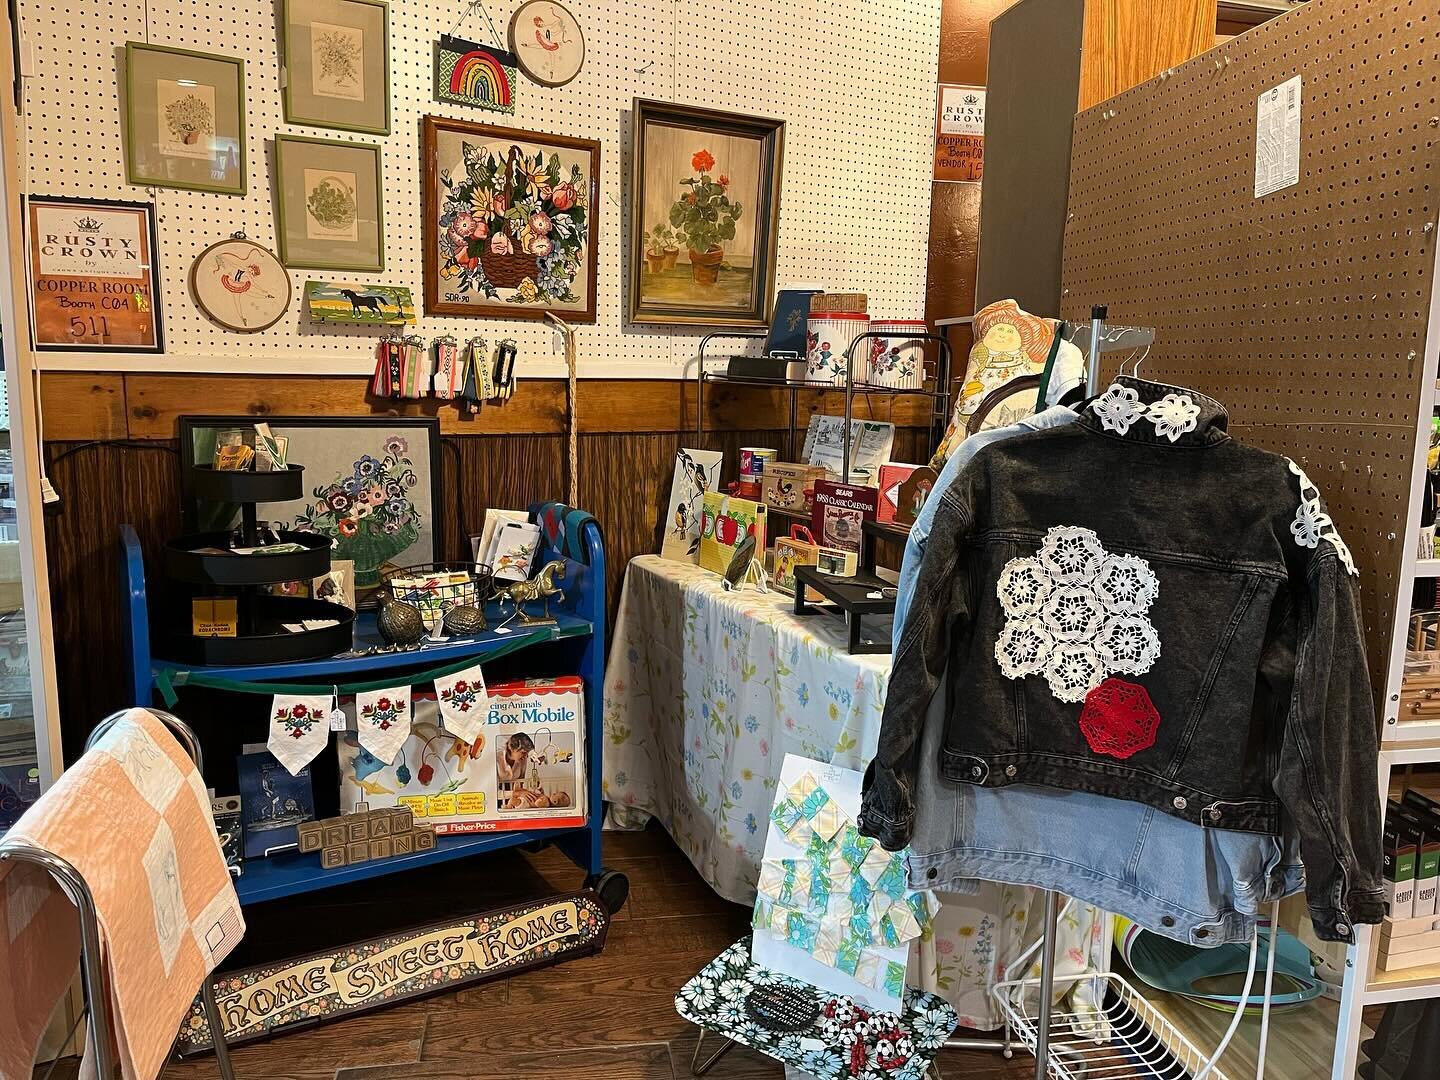 🚨 NEW VENDOR ALERT 🚨 

It&rsquo;s gloomy outside, but having a new vendor like Whitney brightens our day! 
Her mix of charming vintage textiles, sweet children&rsquo;s items, and a variety of home decor is like a warm hug.
Come take a walk down mem